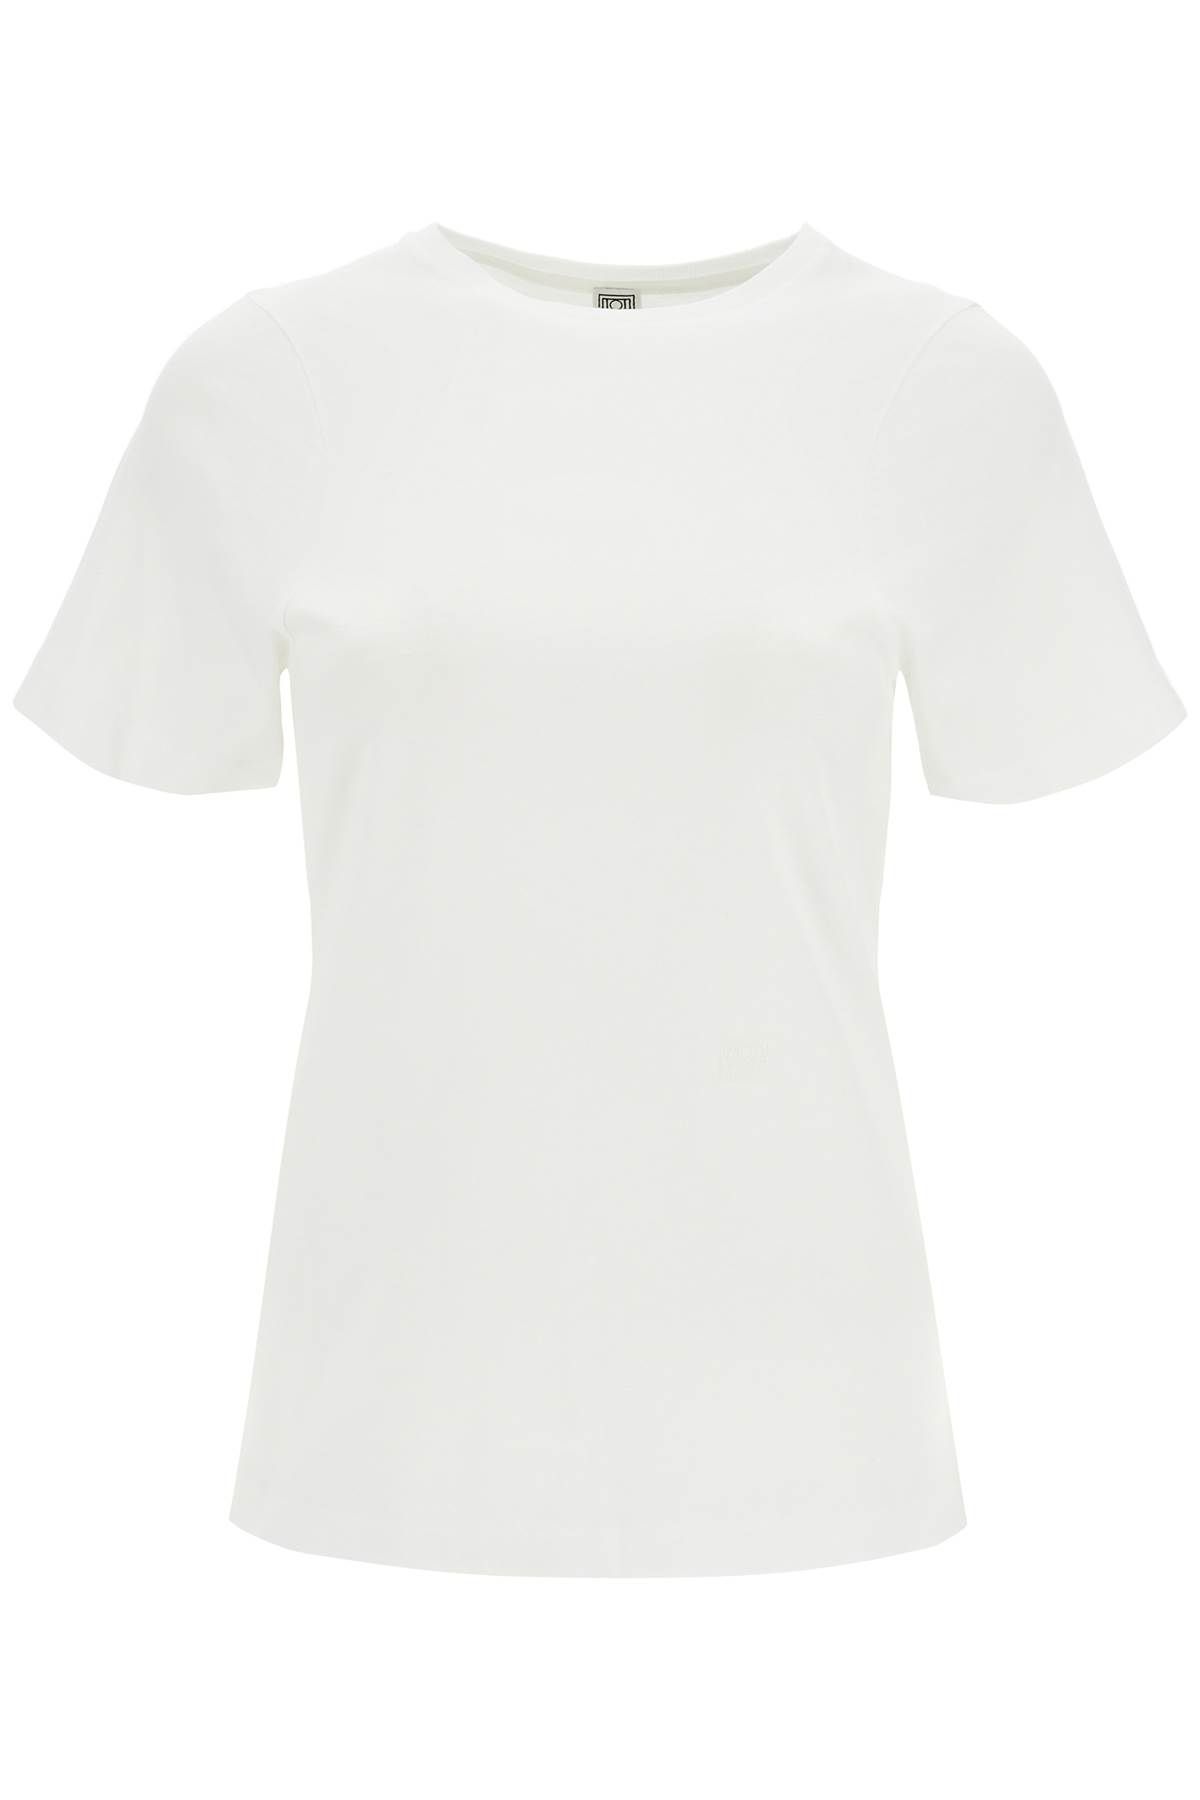 Toteme TOTEME curved seam t-shirt